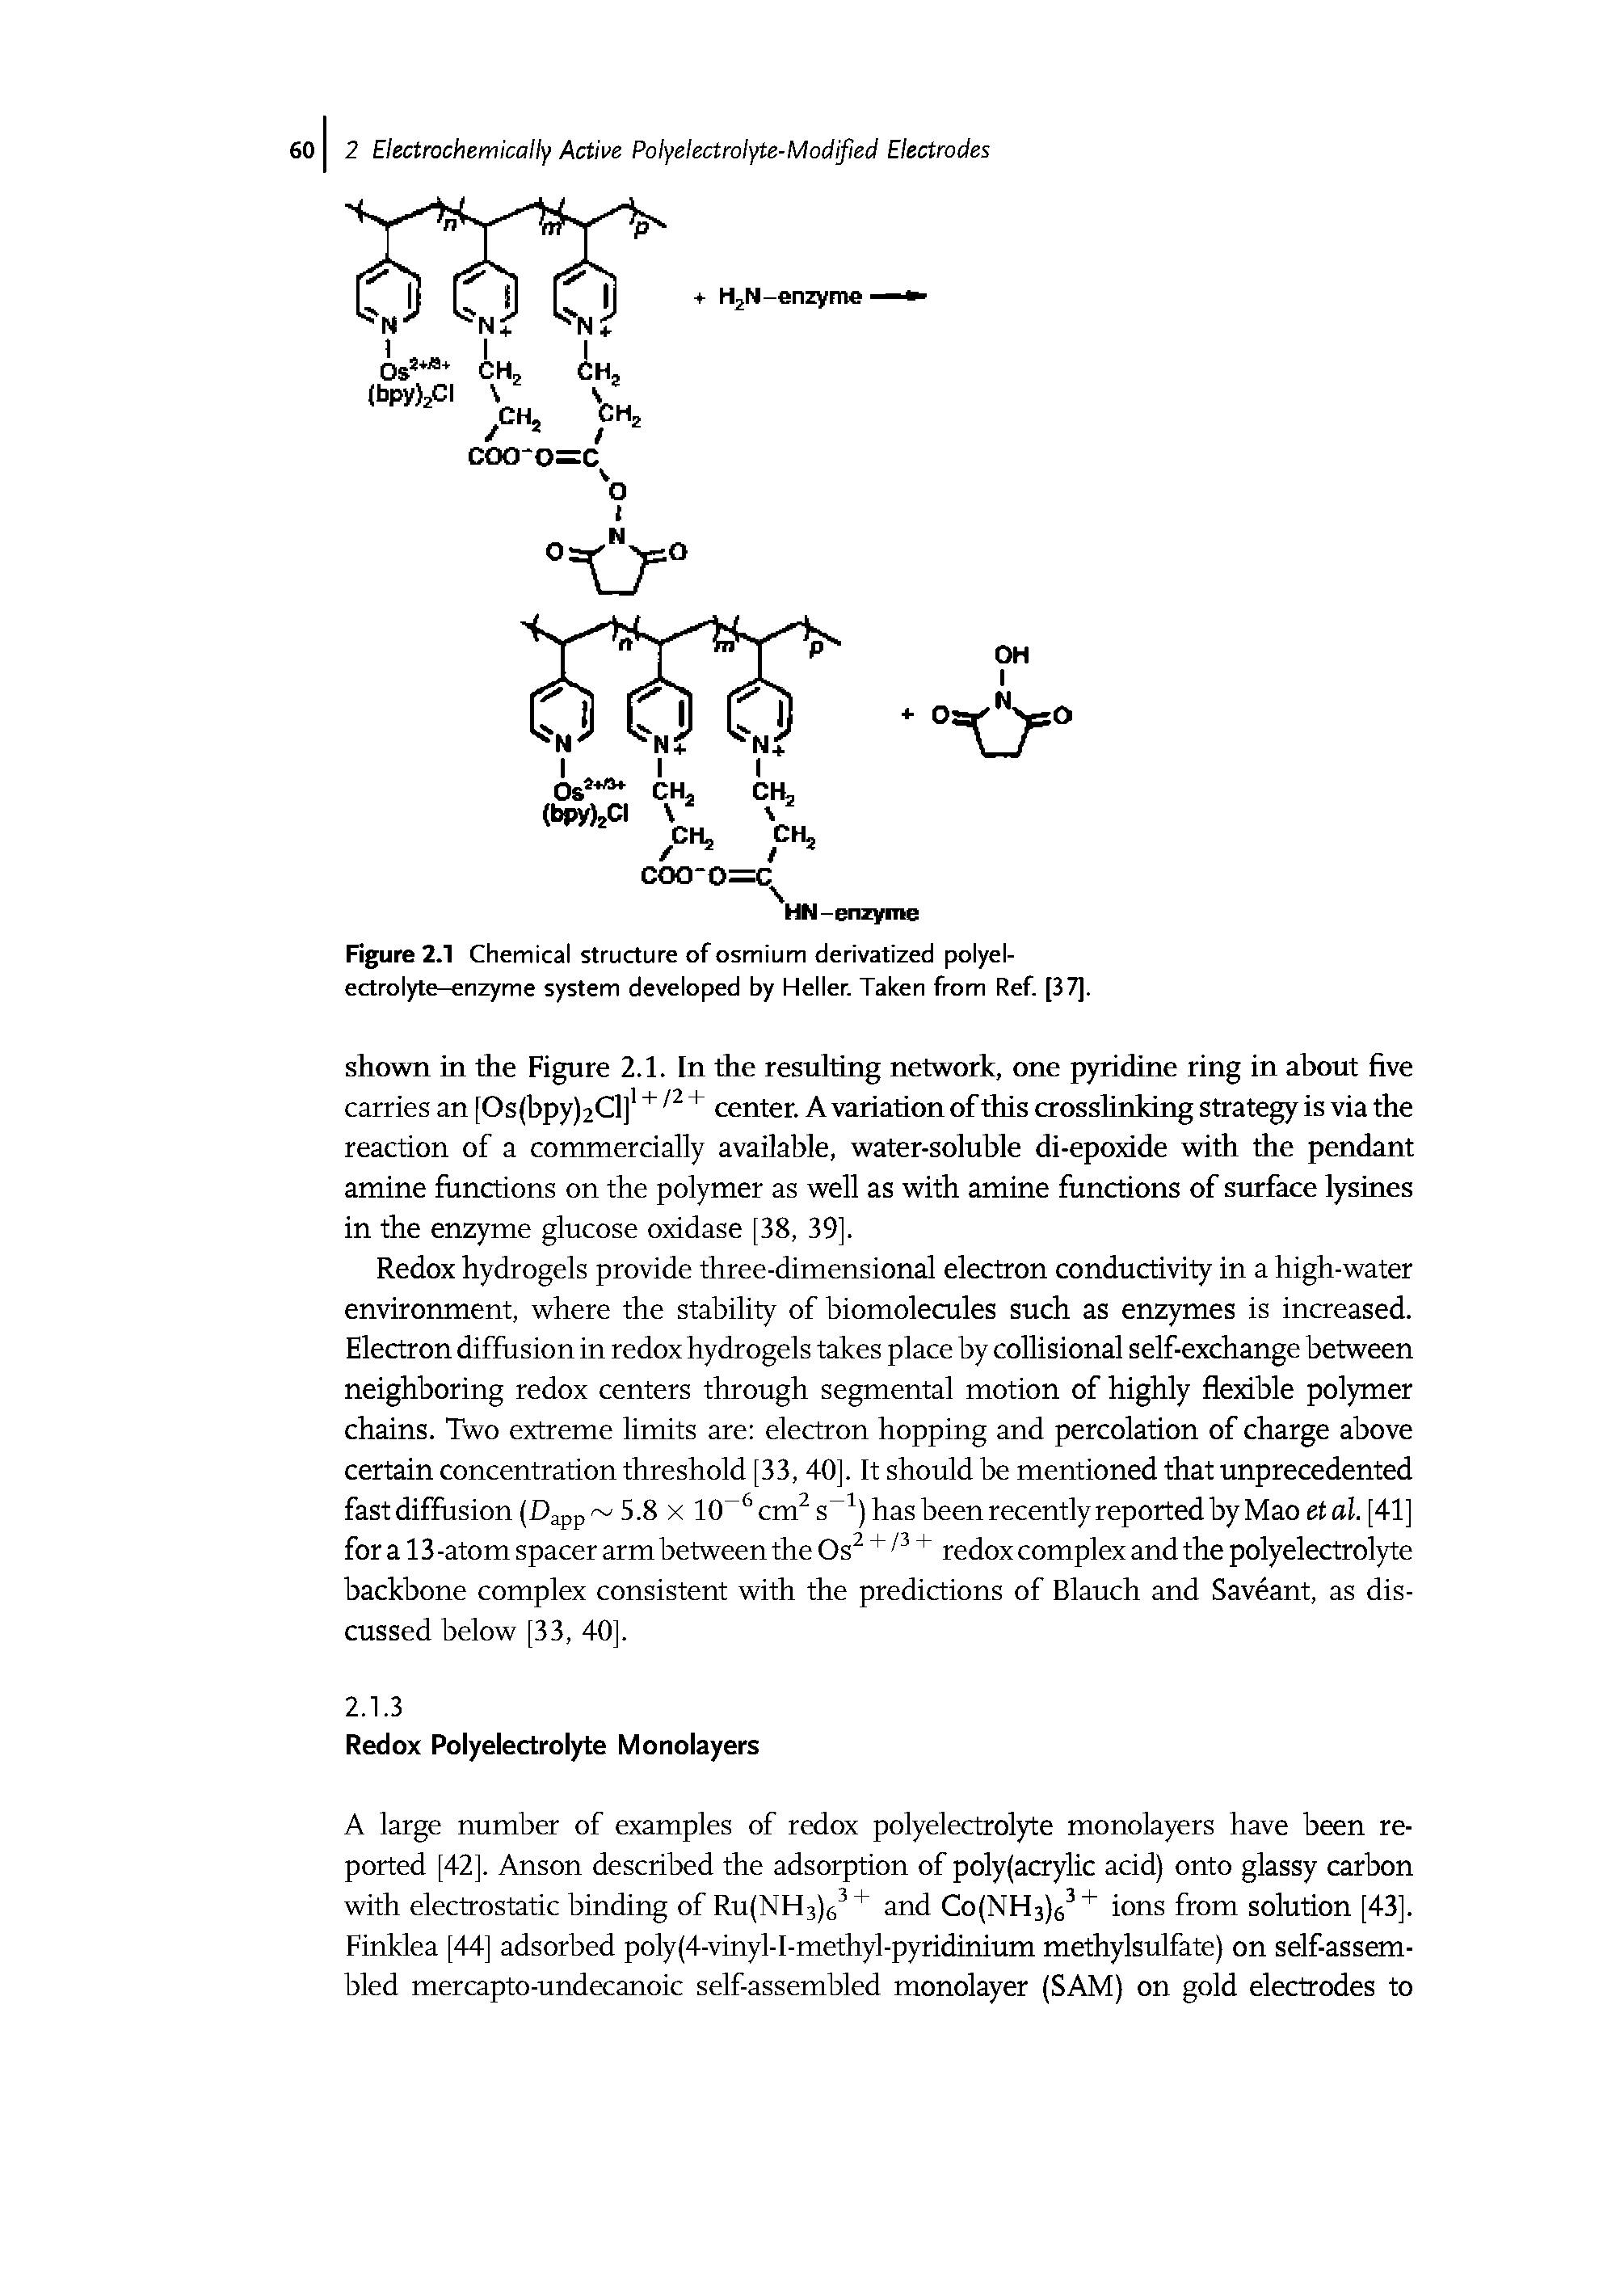 Figure 2.1 Chemical structure of osmium derivatized polyelectrolyte—enzyme system developed by Heller. Taken from Ref. [37].